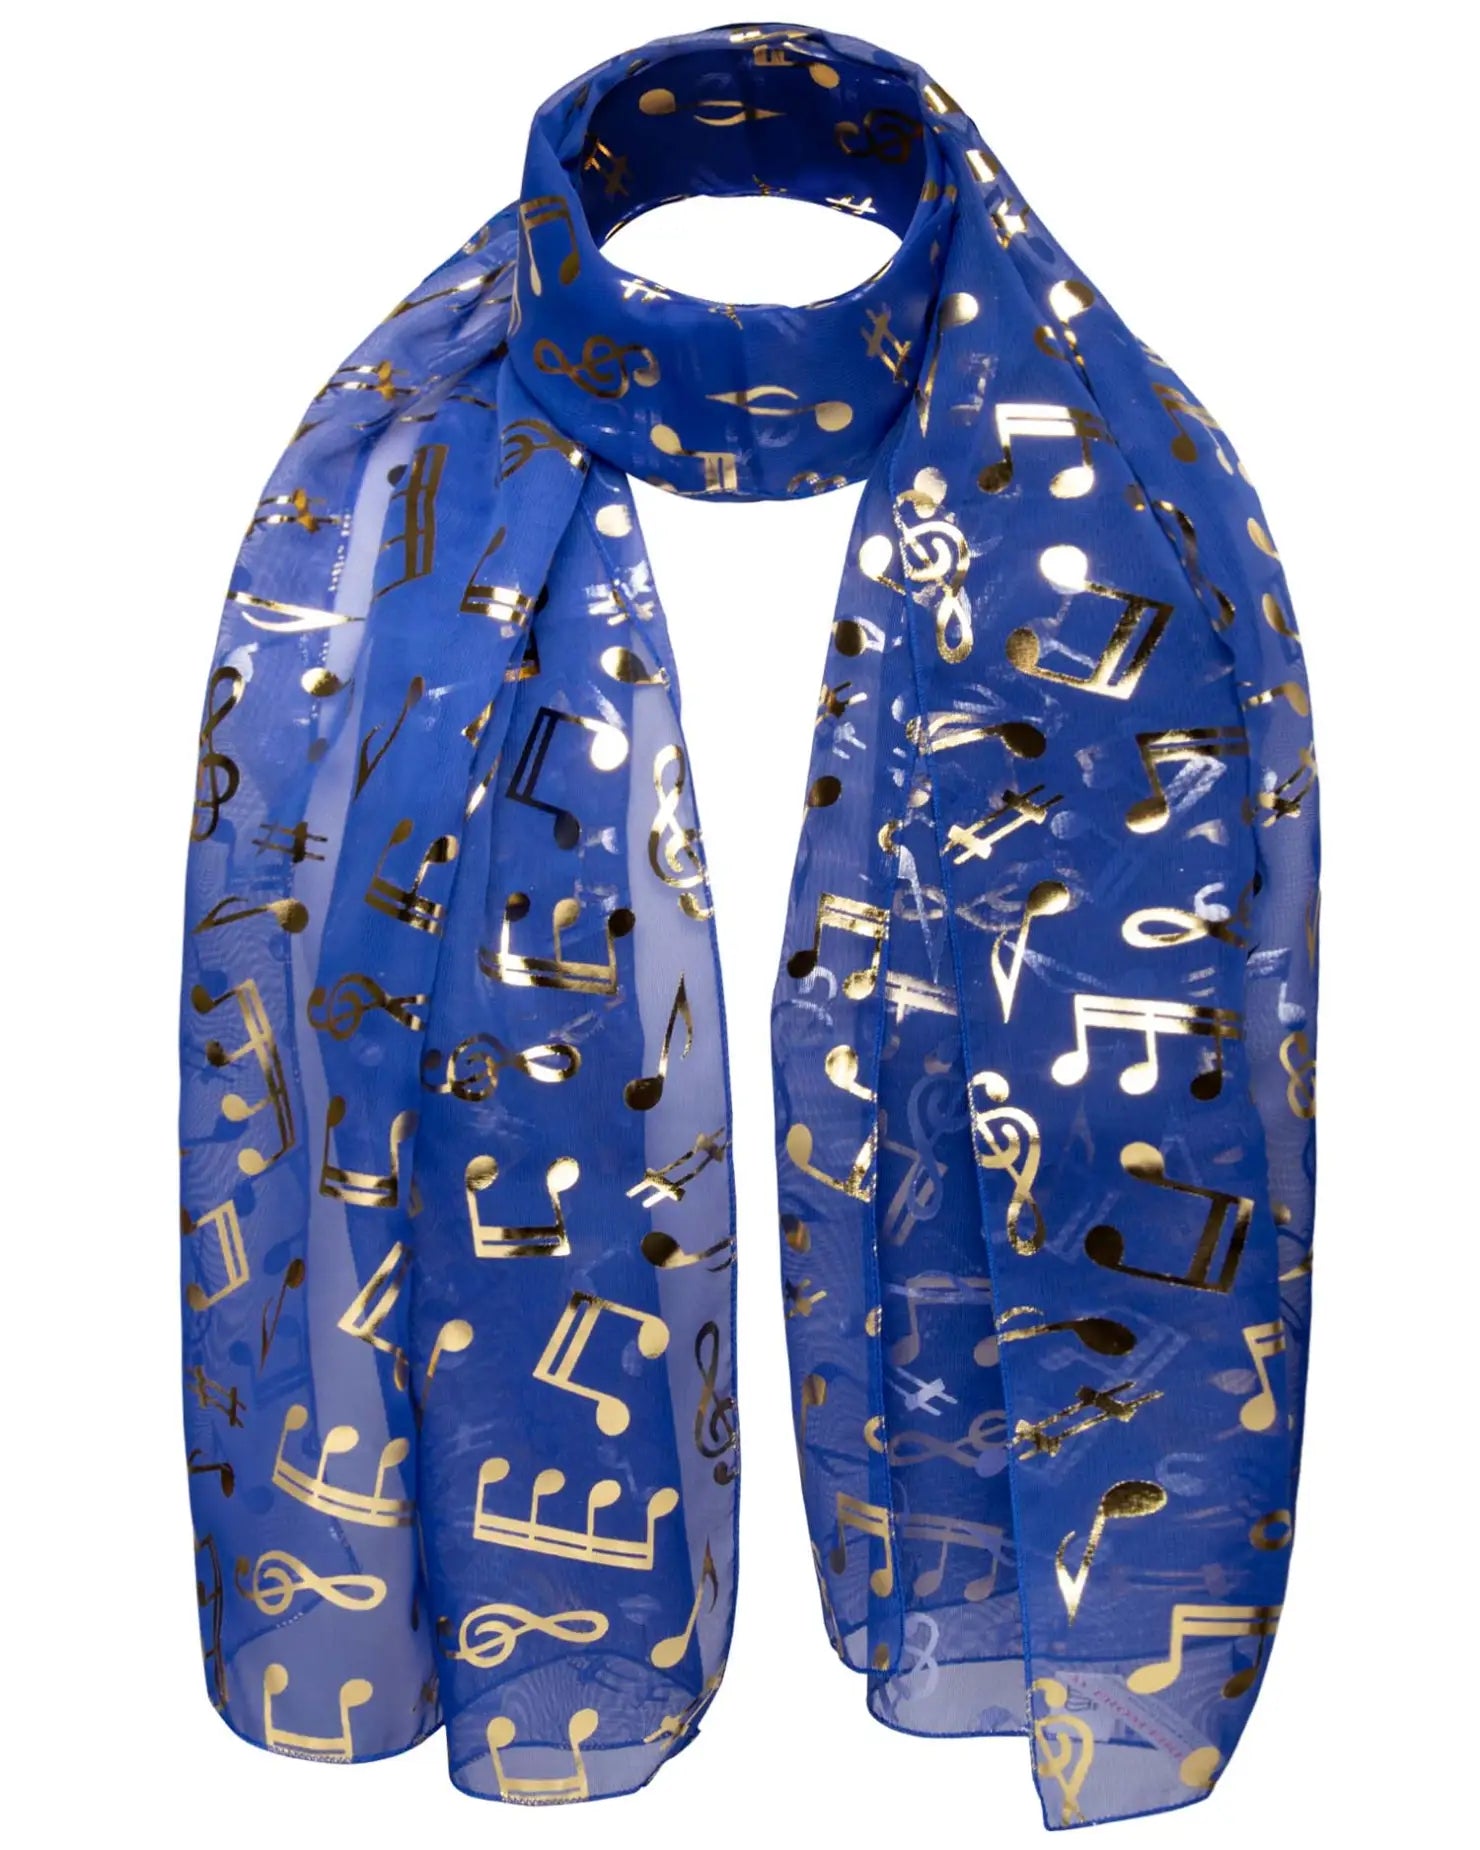 Blue chiffon scarf with gold foil music notes.